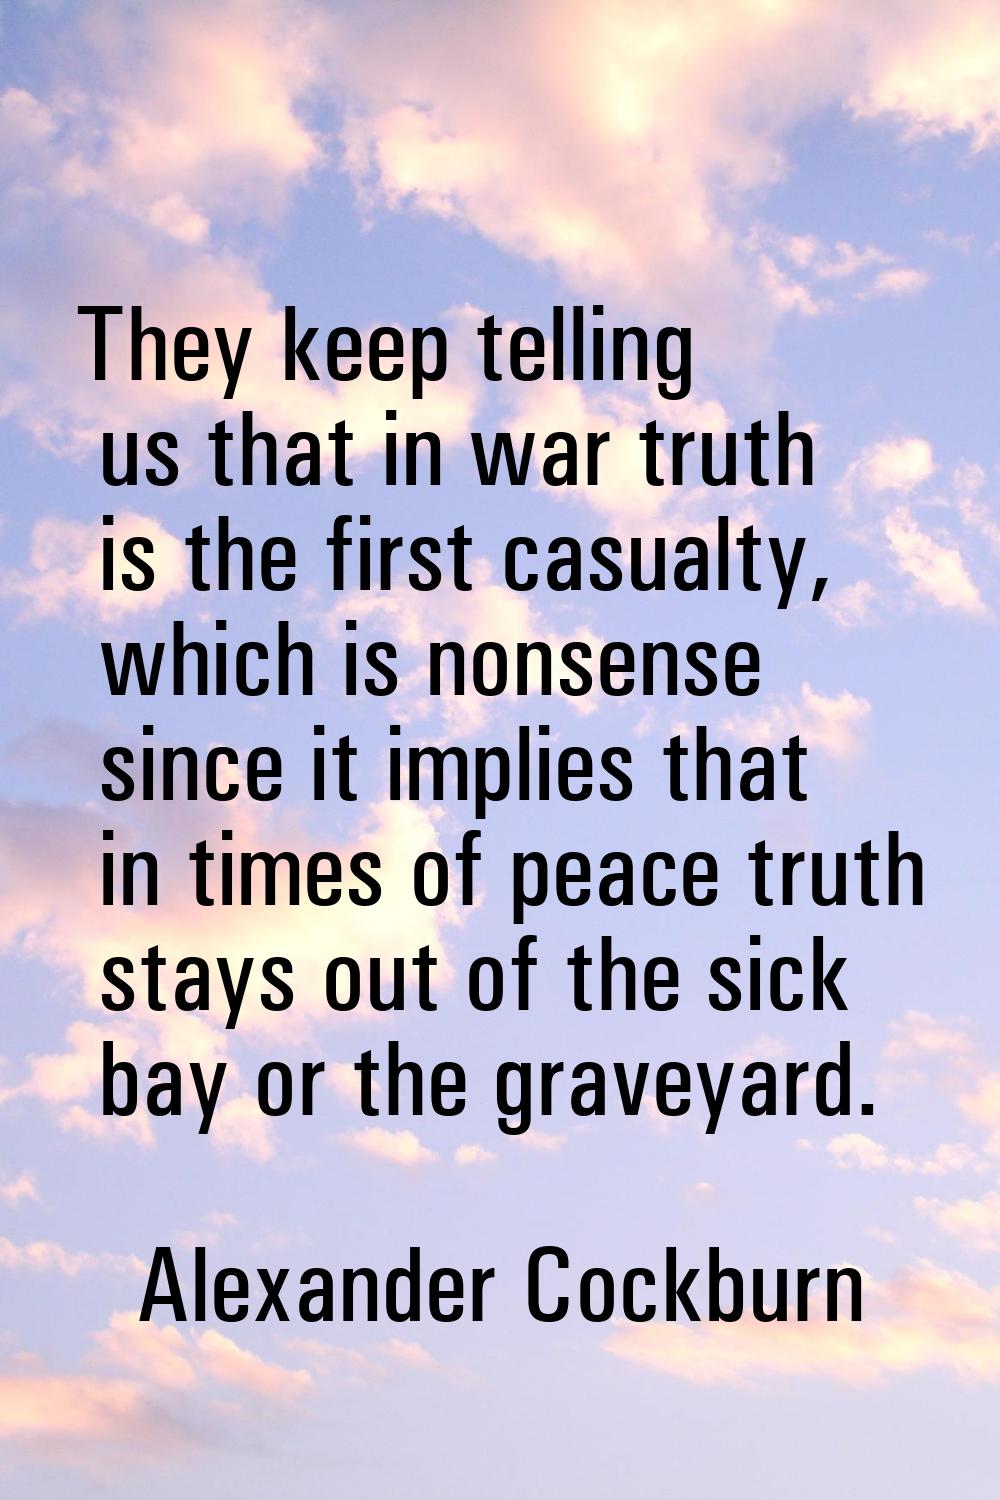 They keep telling us that in war truth is the first casualty, which is nonsense since it implies th